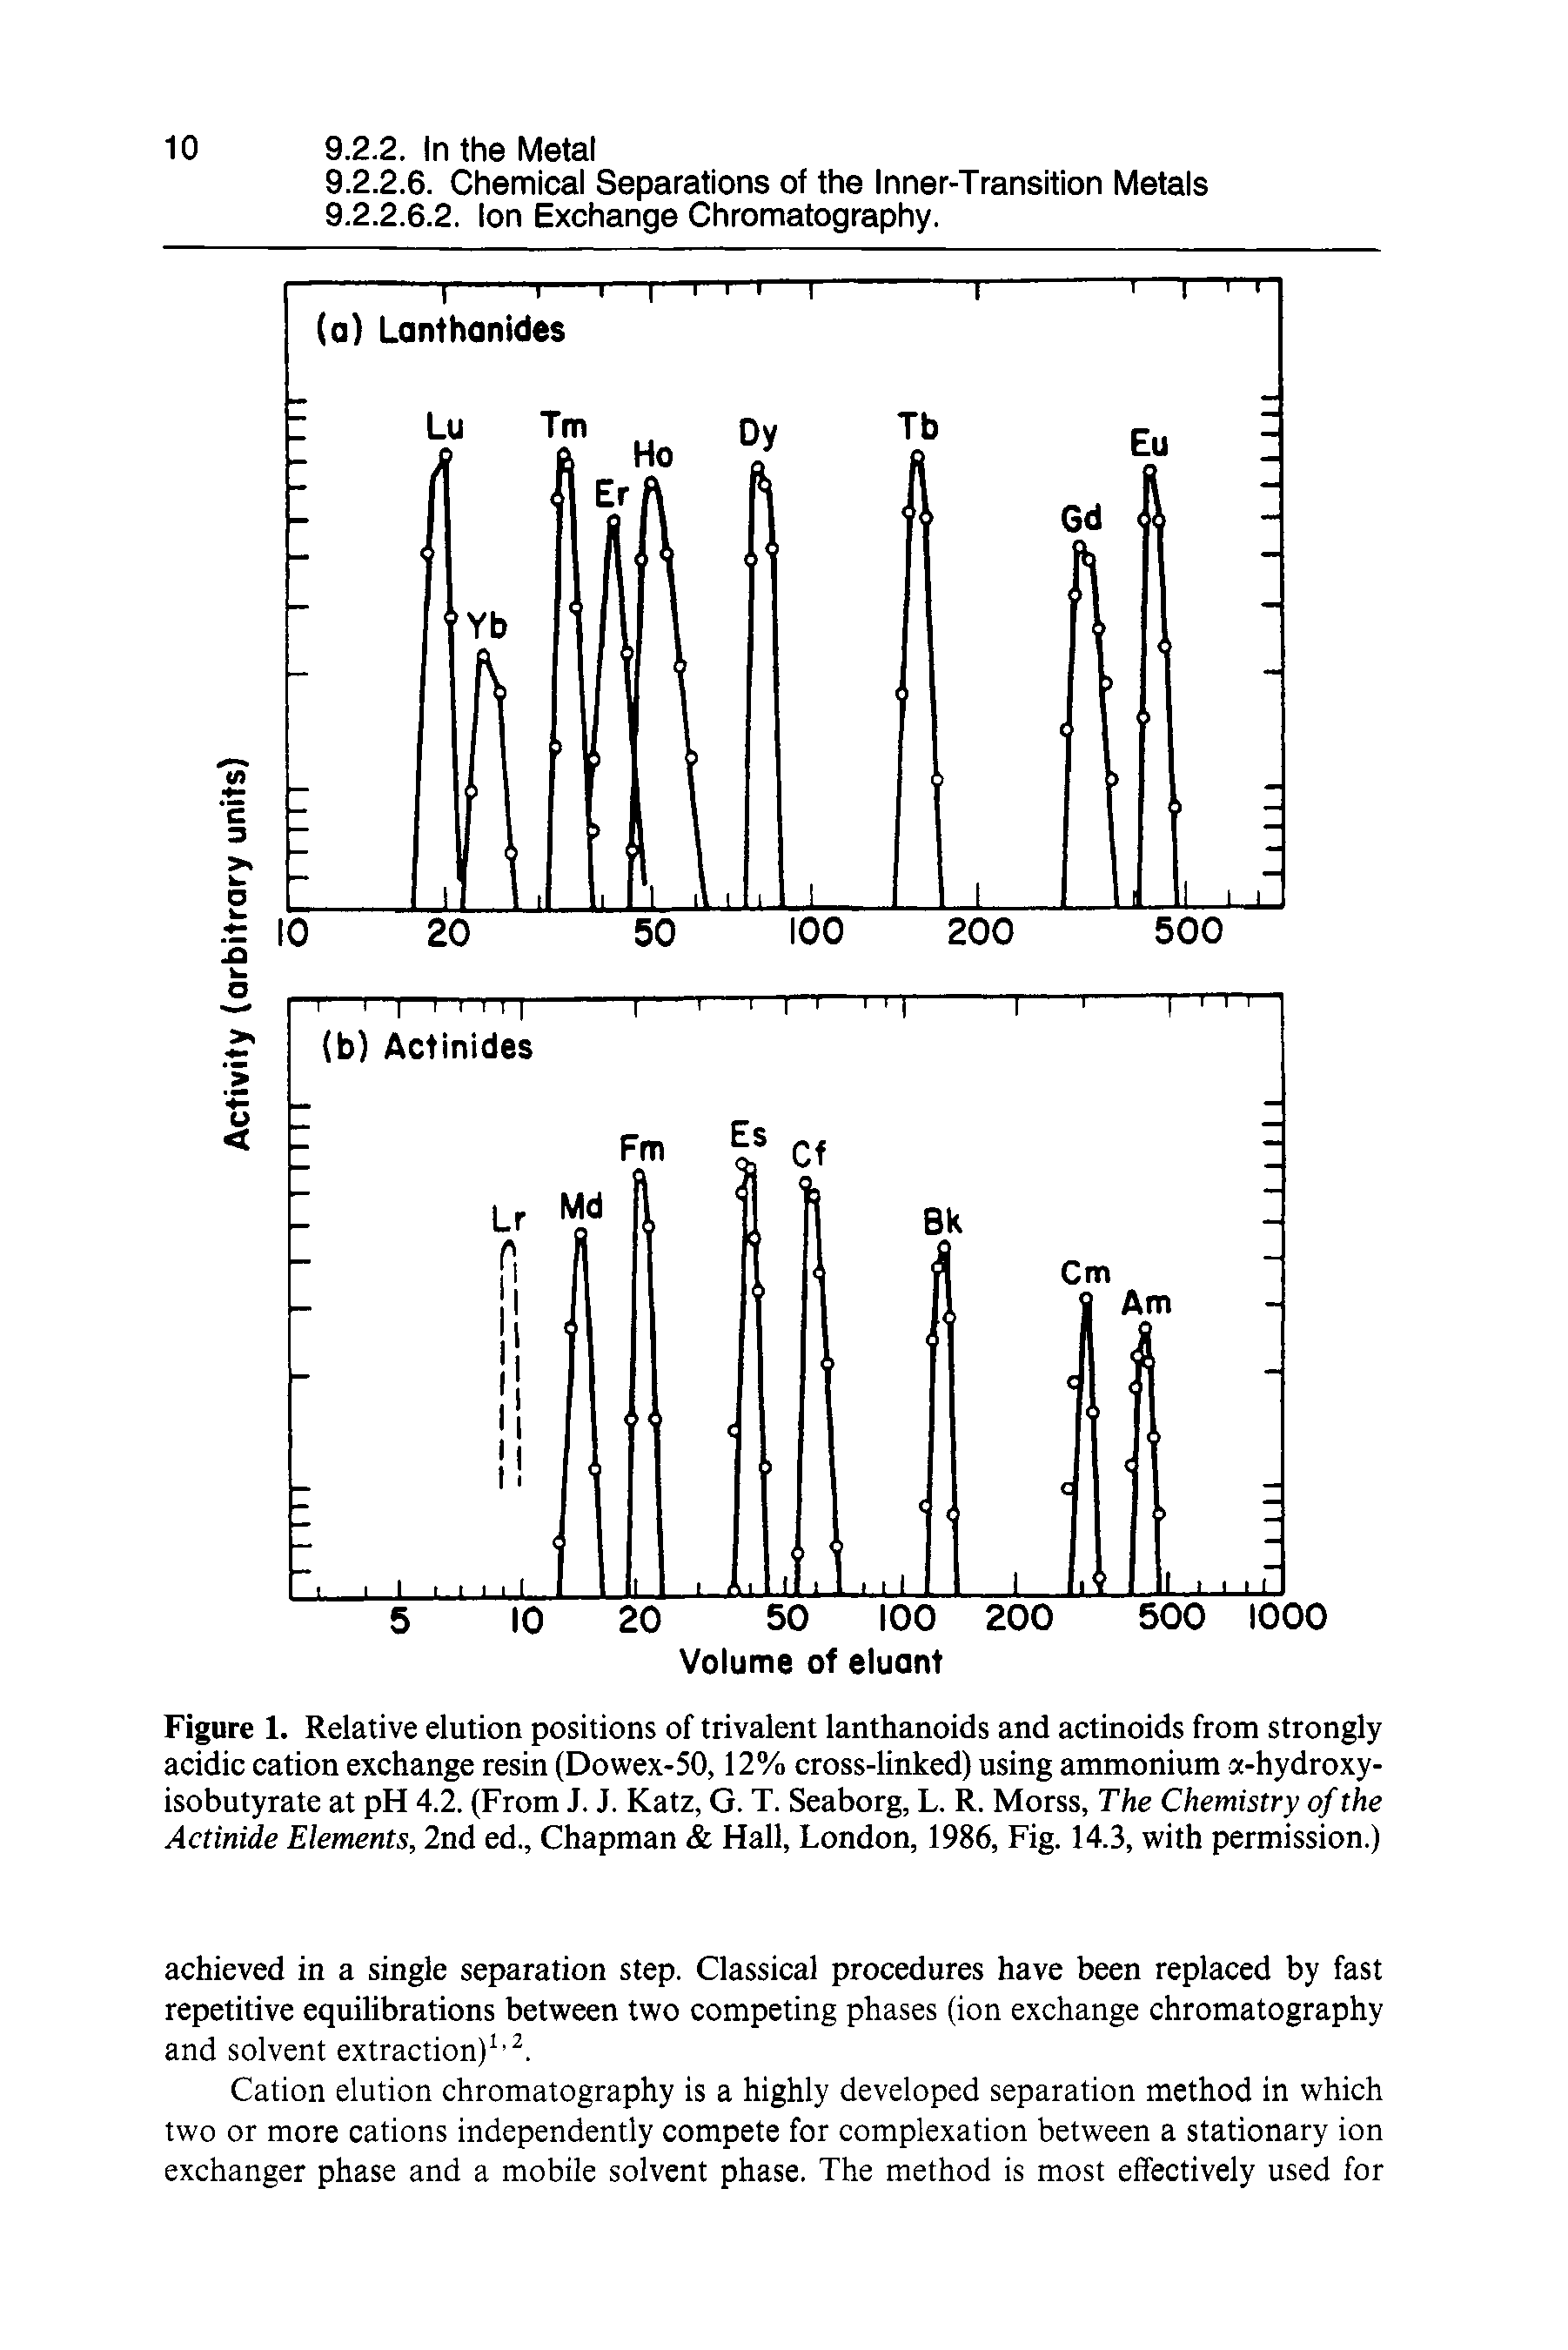 Figure 1. Relative elution positions of trivalent lanthanoids and actinoids from strongly acidic cation exchange resin (Dowex-50,12% cross-linked) using ammonium a-hydroxy-isobutyrate at pH 4.2. (From J. J. Katz, G. T. Seaborg, L. R. Morss, The Chemistry of the Actinide Elements, 2nd ed.. Chapman Hall, London, 1986, Fig. 14.3, with permission.)...